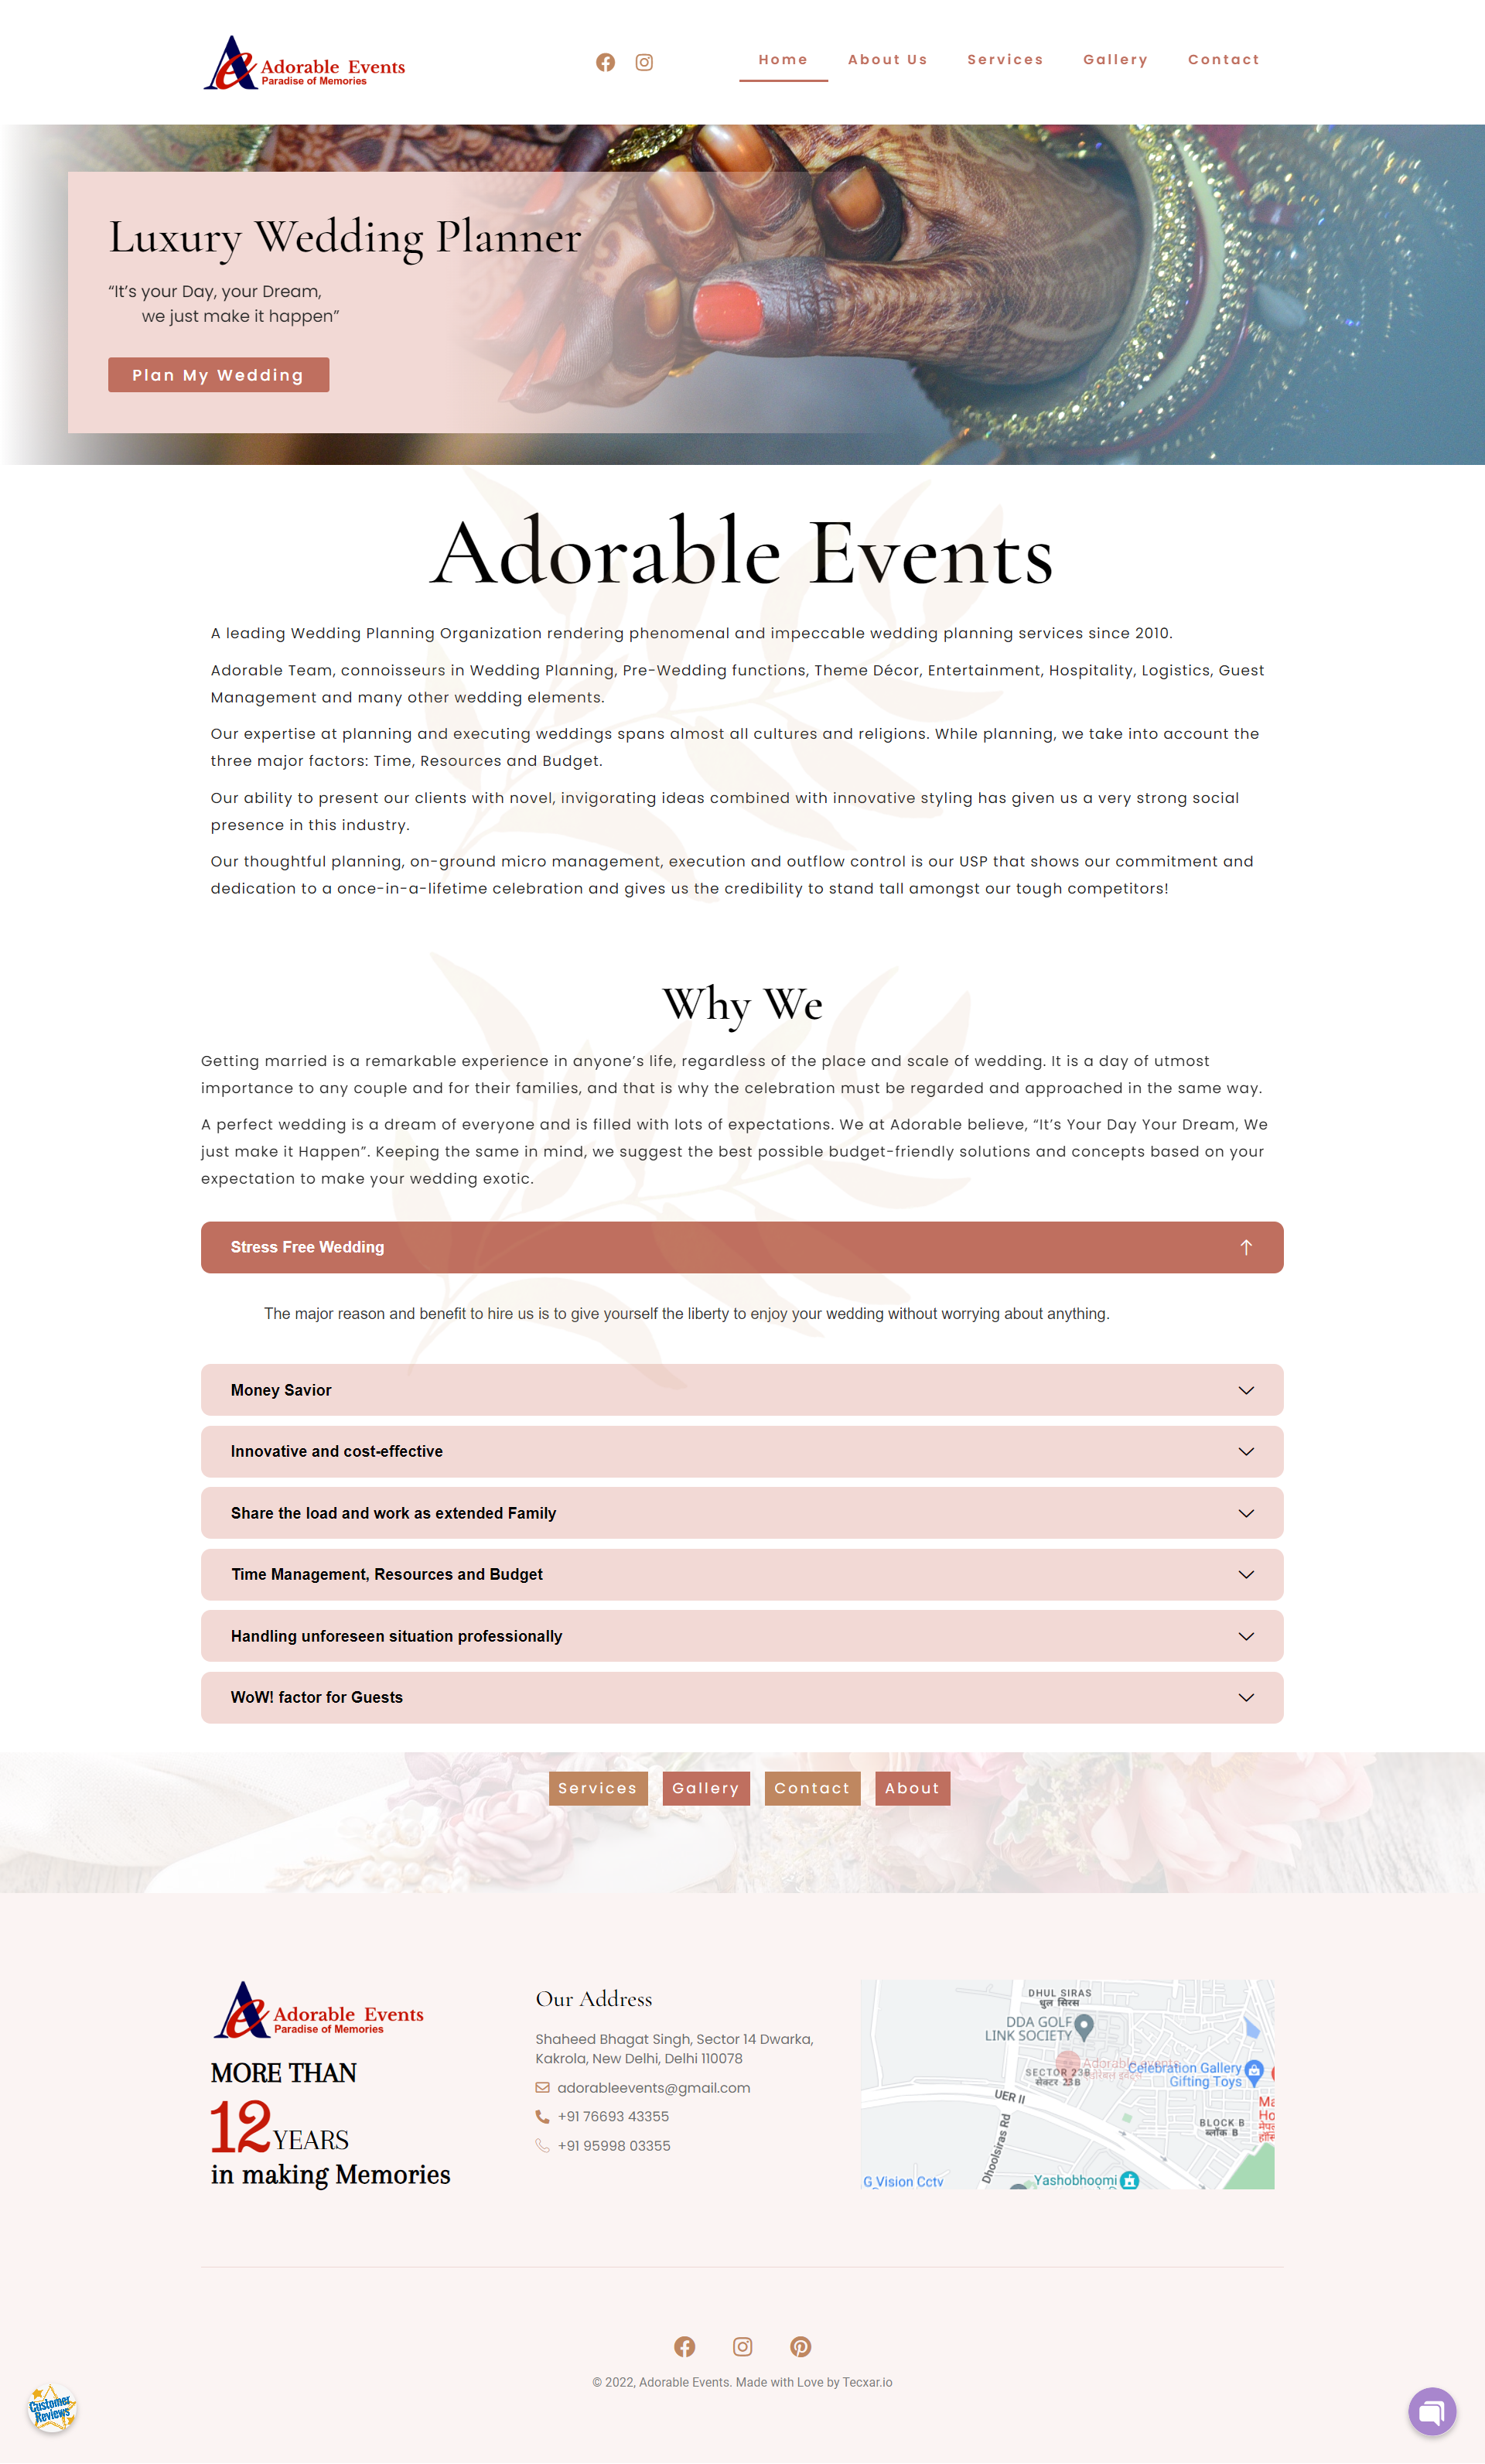 Website 2 Adorable Events